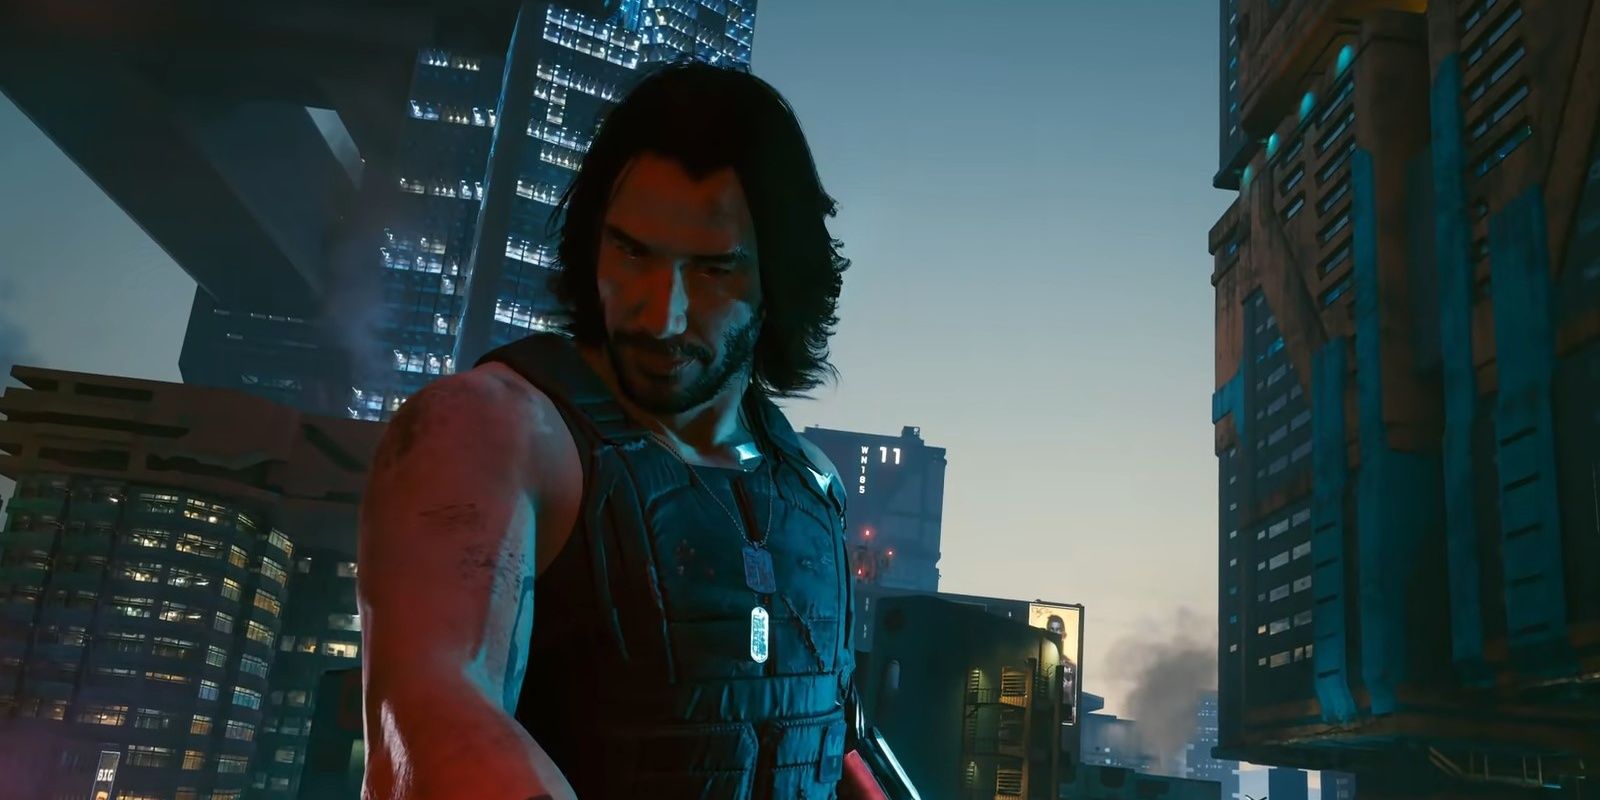 Johnny about to do the secret ending mission in Cyberpunk 2077